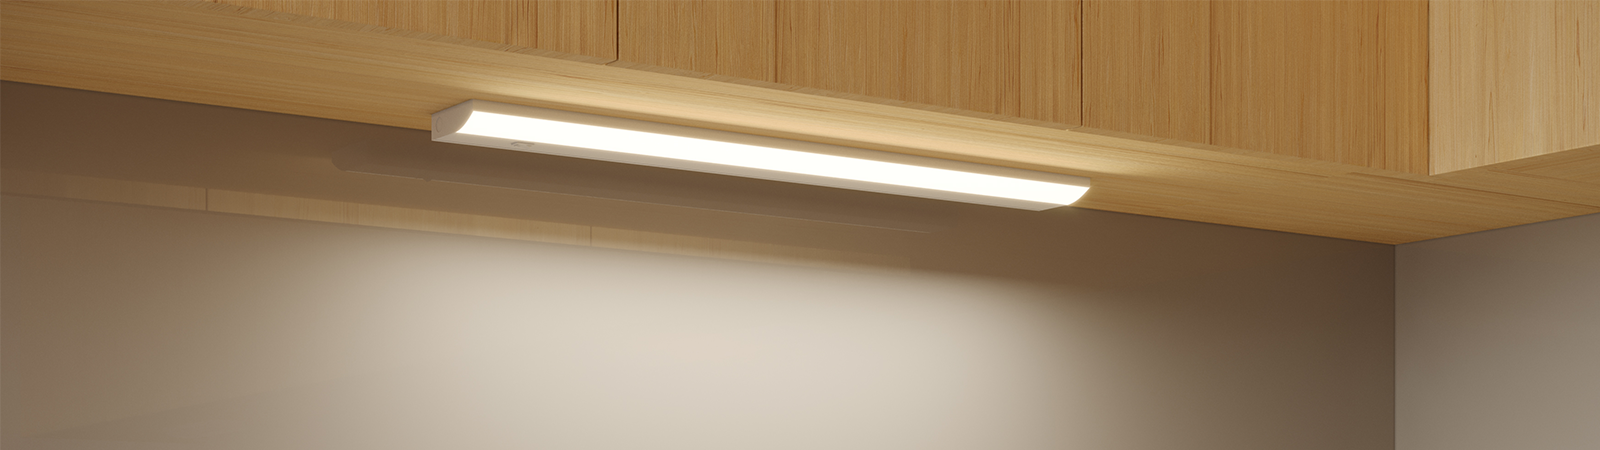 Under Cabinet Lighting Good Earth, Replace Fluorescent Light Fixture With Led Under Cabinet Lighting